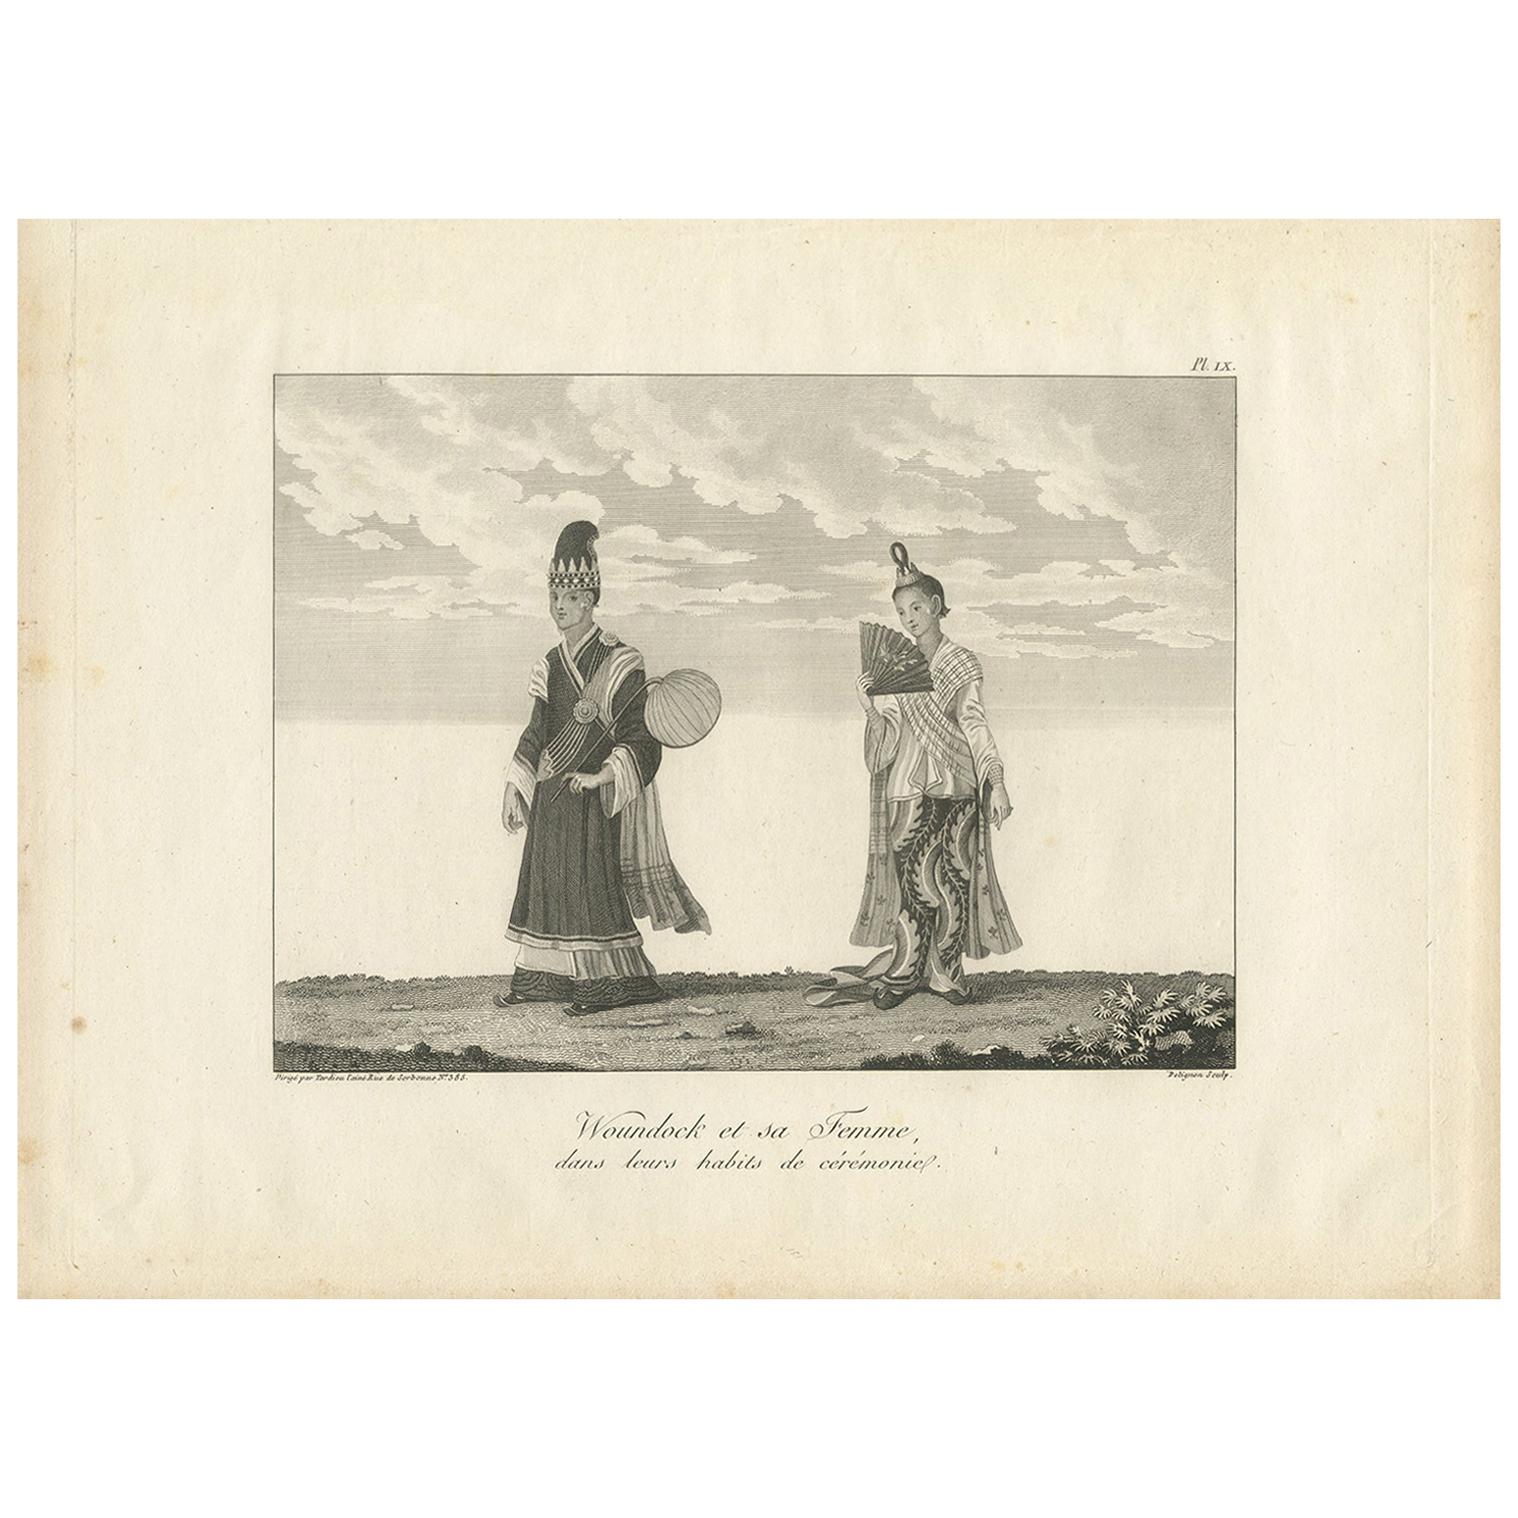 Antique Print of Burmese Costumes by Symes, '1800'